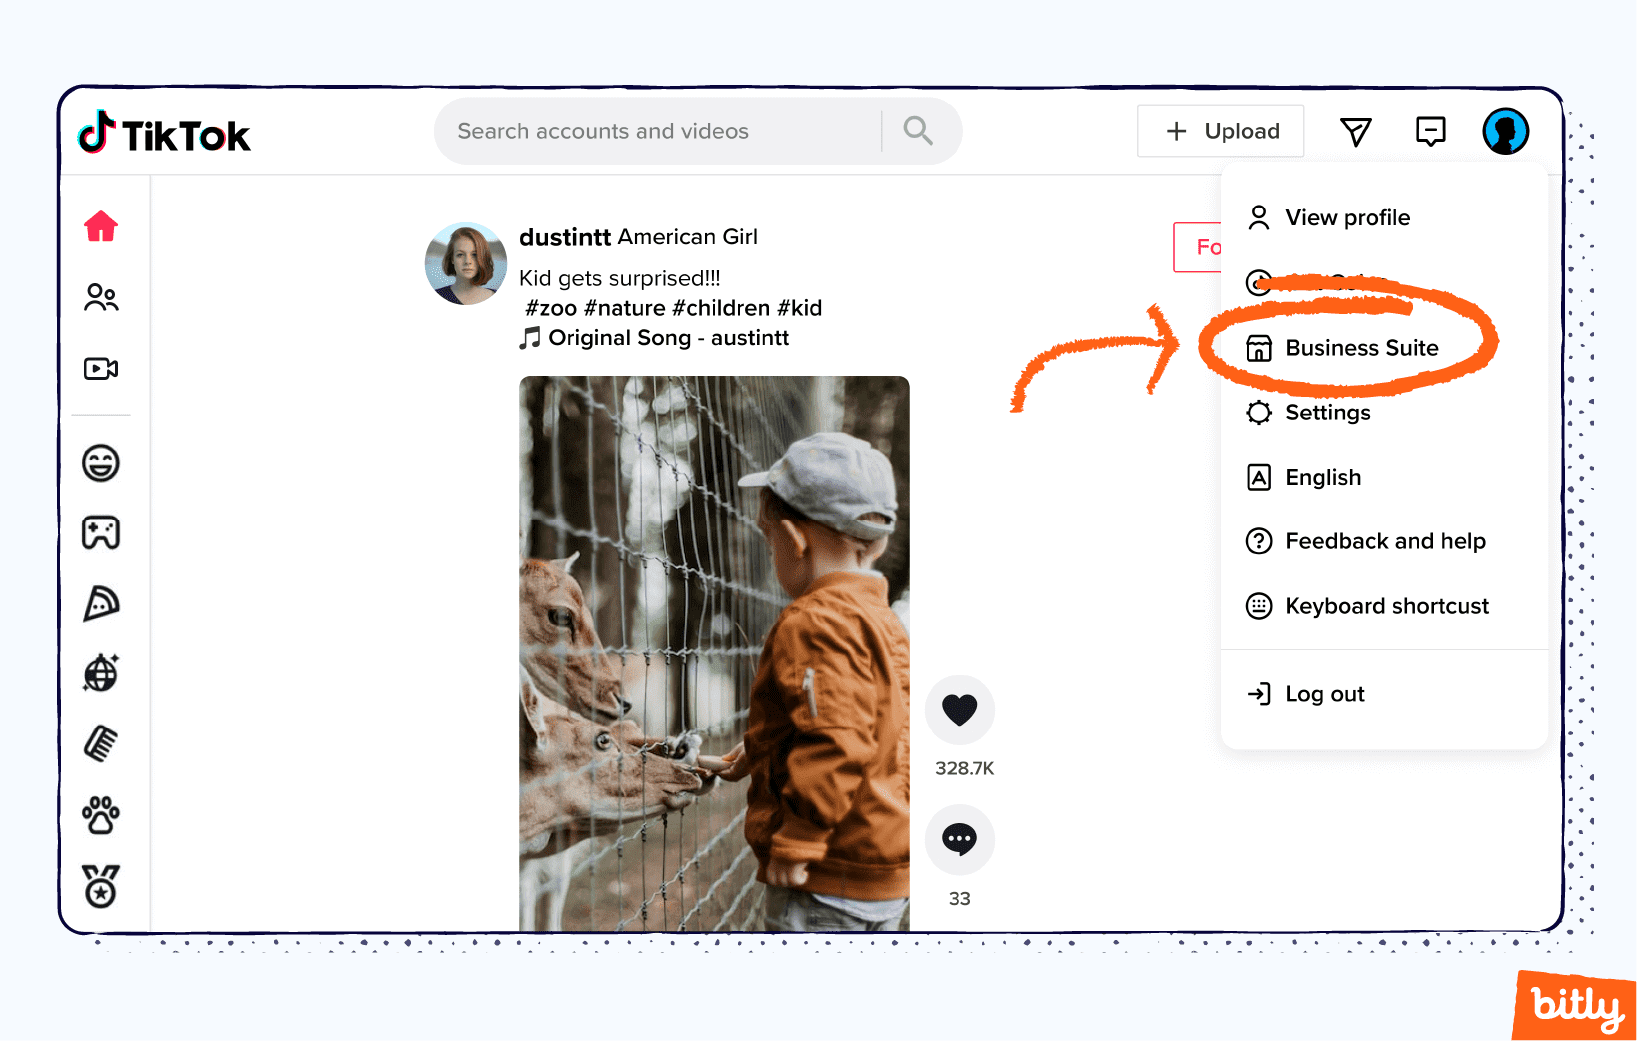 An orange arrow pointing to the circled words business suite on the desktop version of a TikTok account.